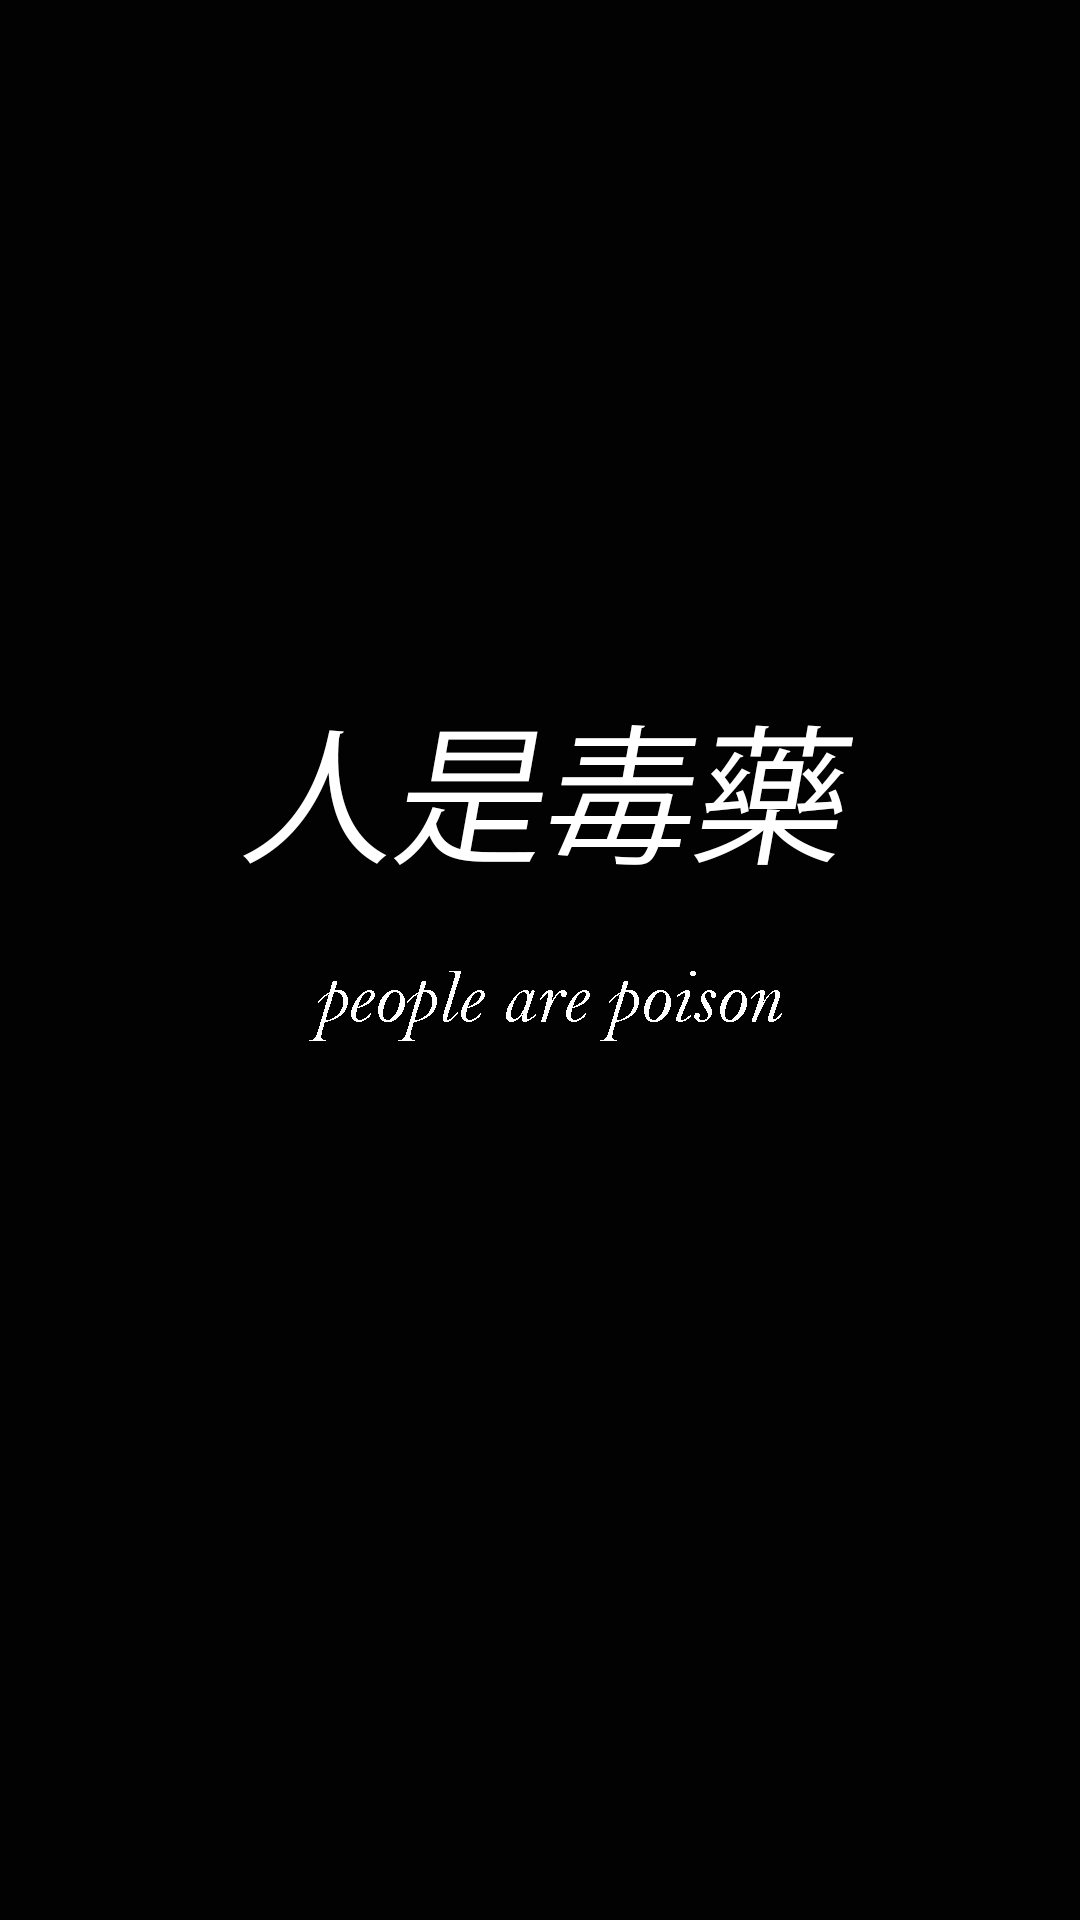 Lock Screens. Japanese quotes, Japanese words, Black aesthetic